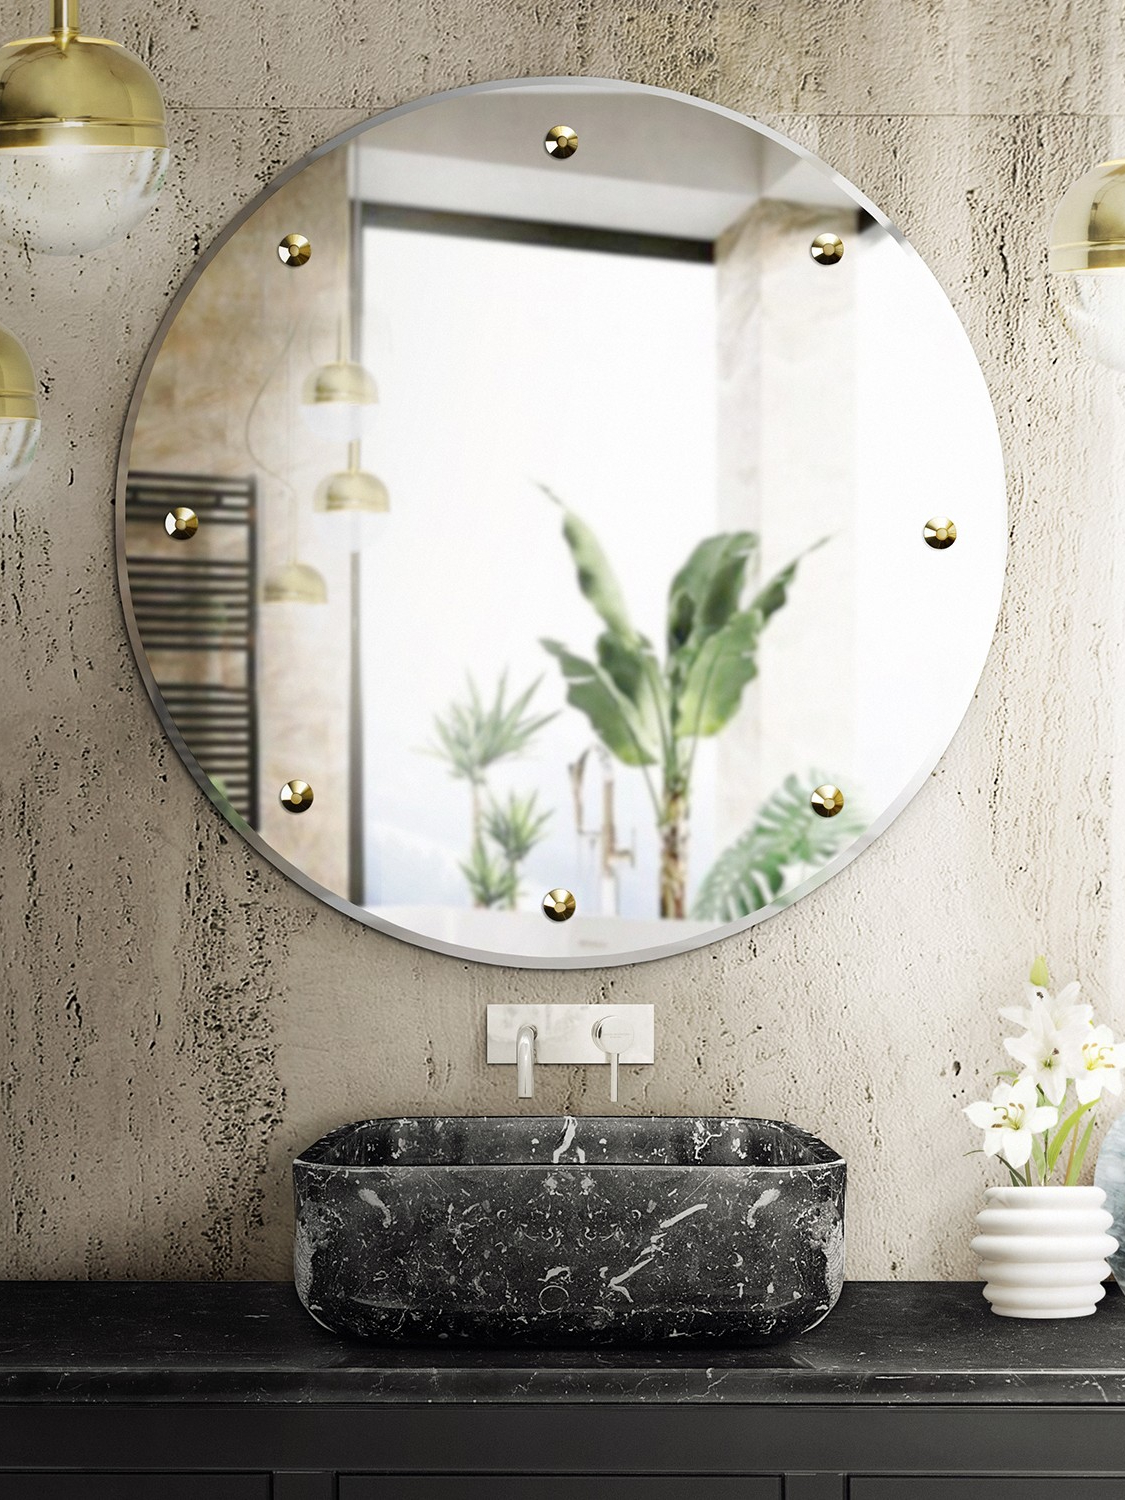 Modern Bathroom With Black And White Marbled Bathroom Sink - Home'Society